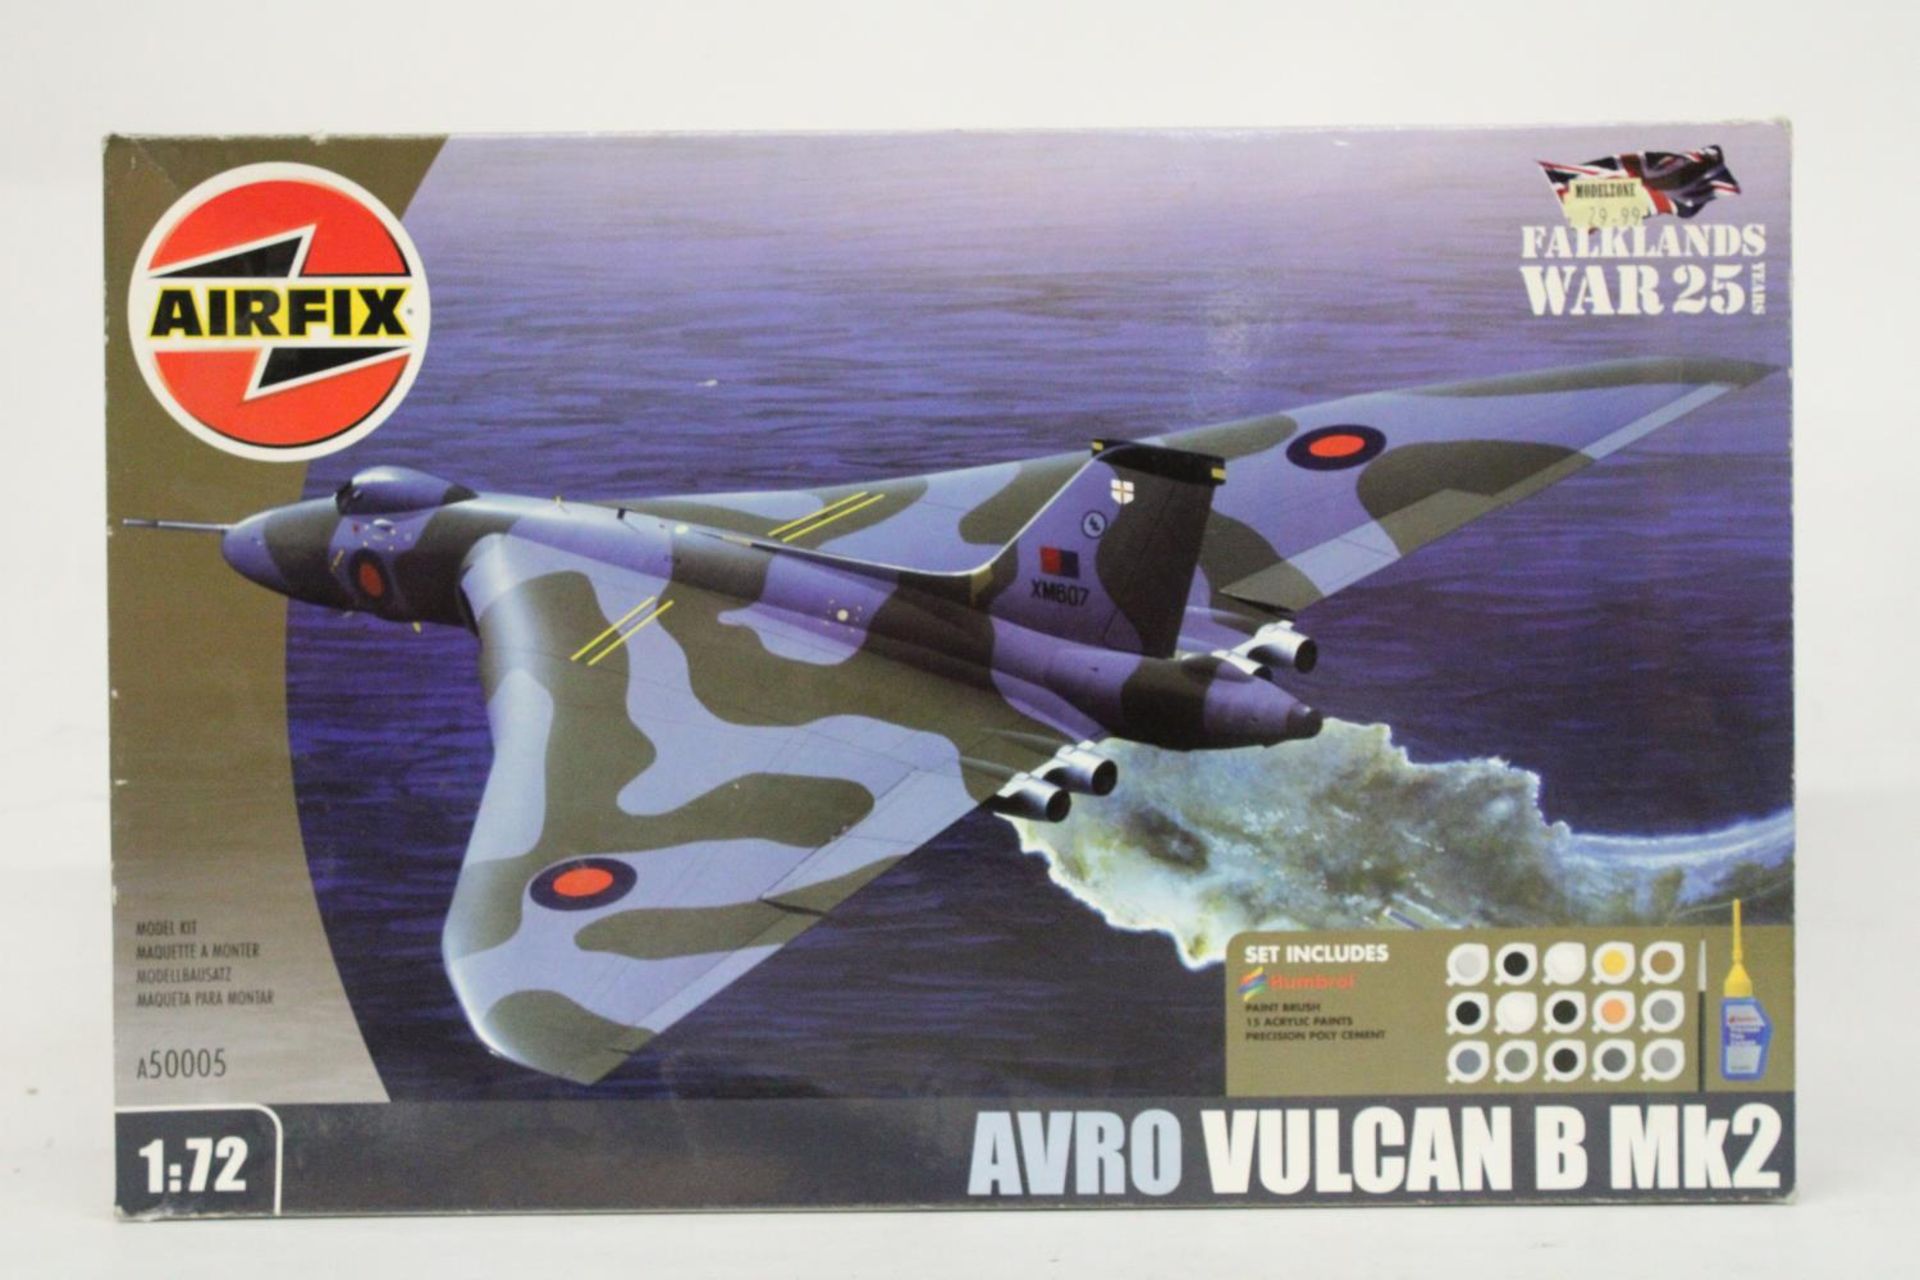 TWO LARGE UNOPENED AIRFIX KITS TO INCLUDE AN AVRO VULCAN B MK2 FALKLANDS WAR 25 YEARS AND A RNLI - Image 3 of 5